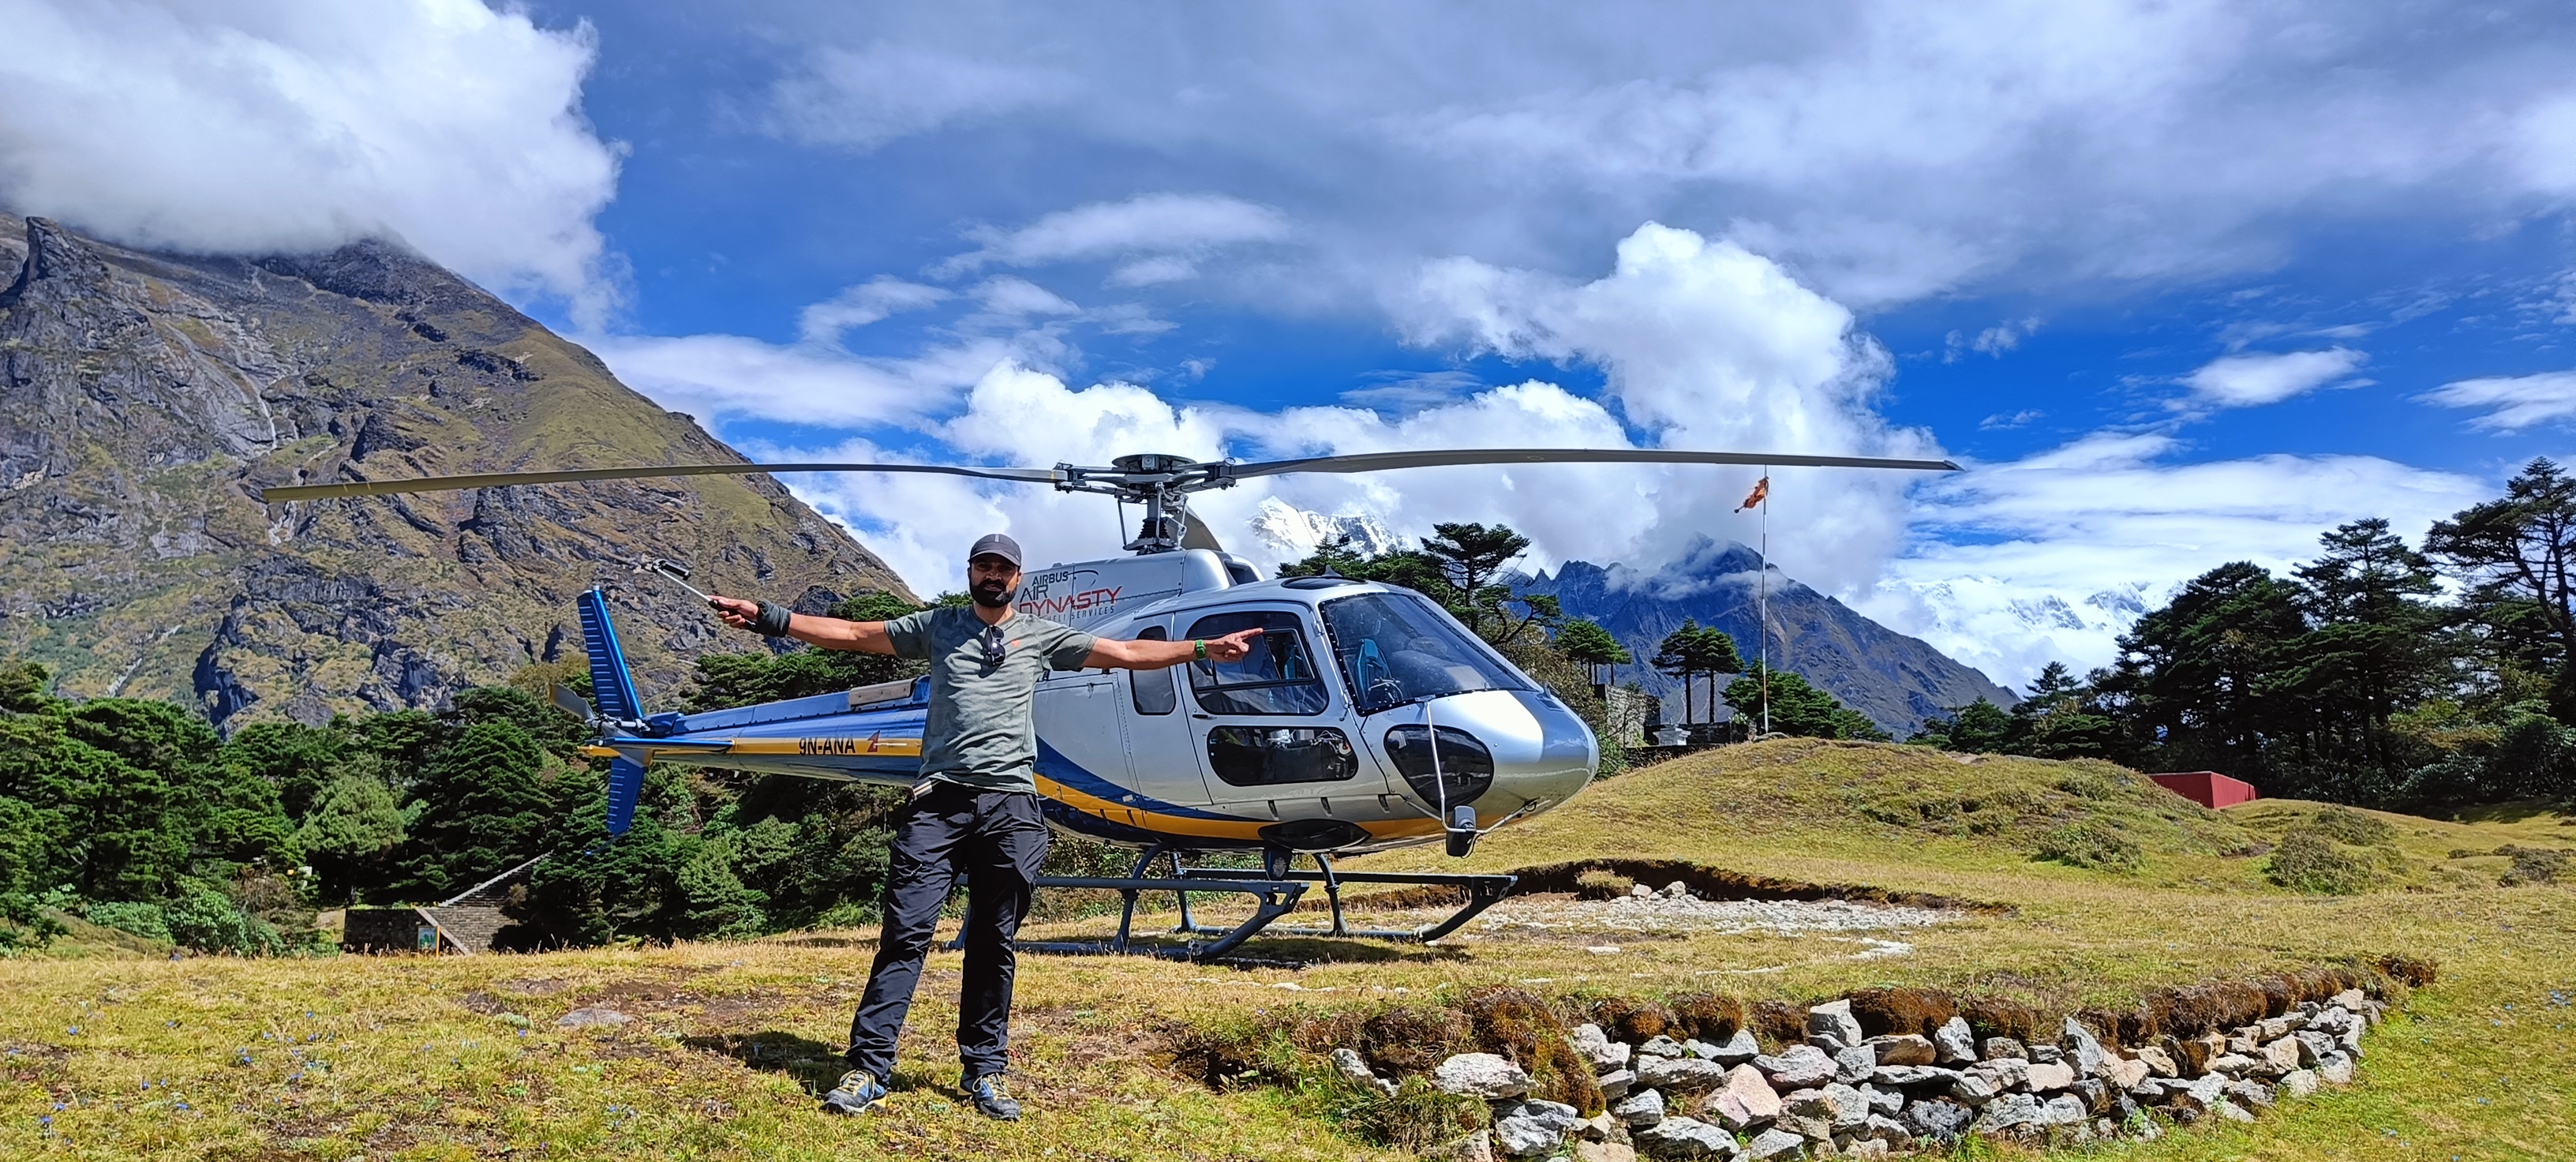 Experience the Spectacular Everest Base Camp Kalapatthar Helicopter Tour in Nepal